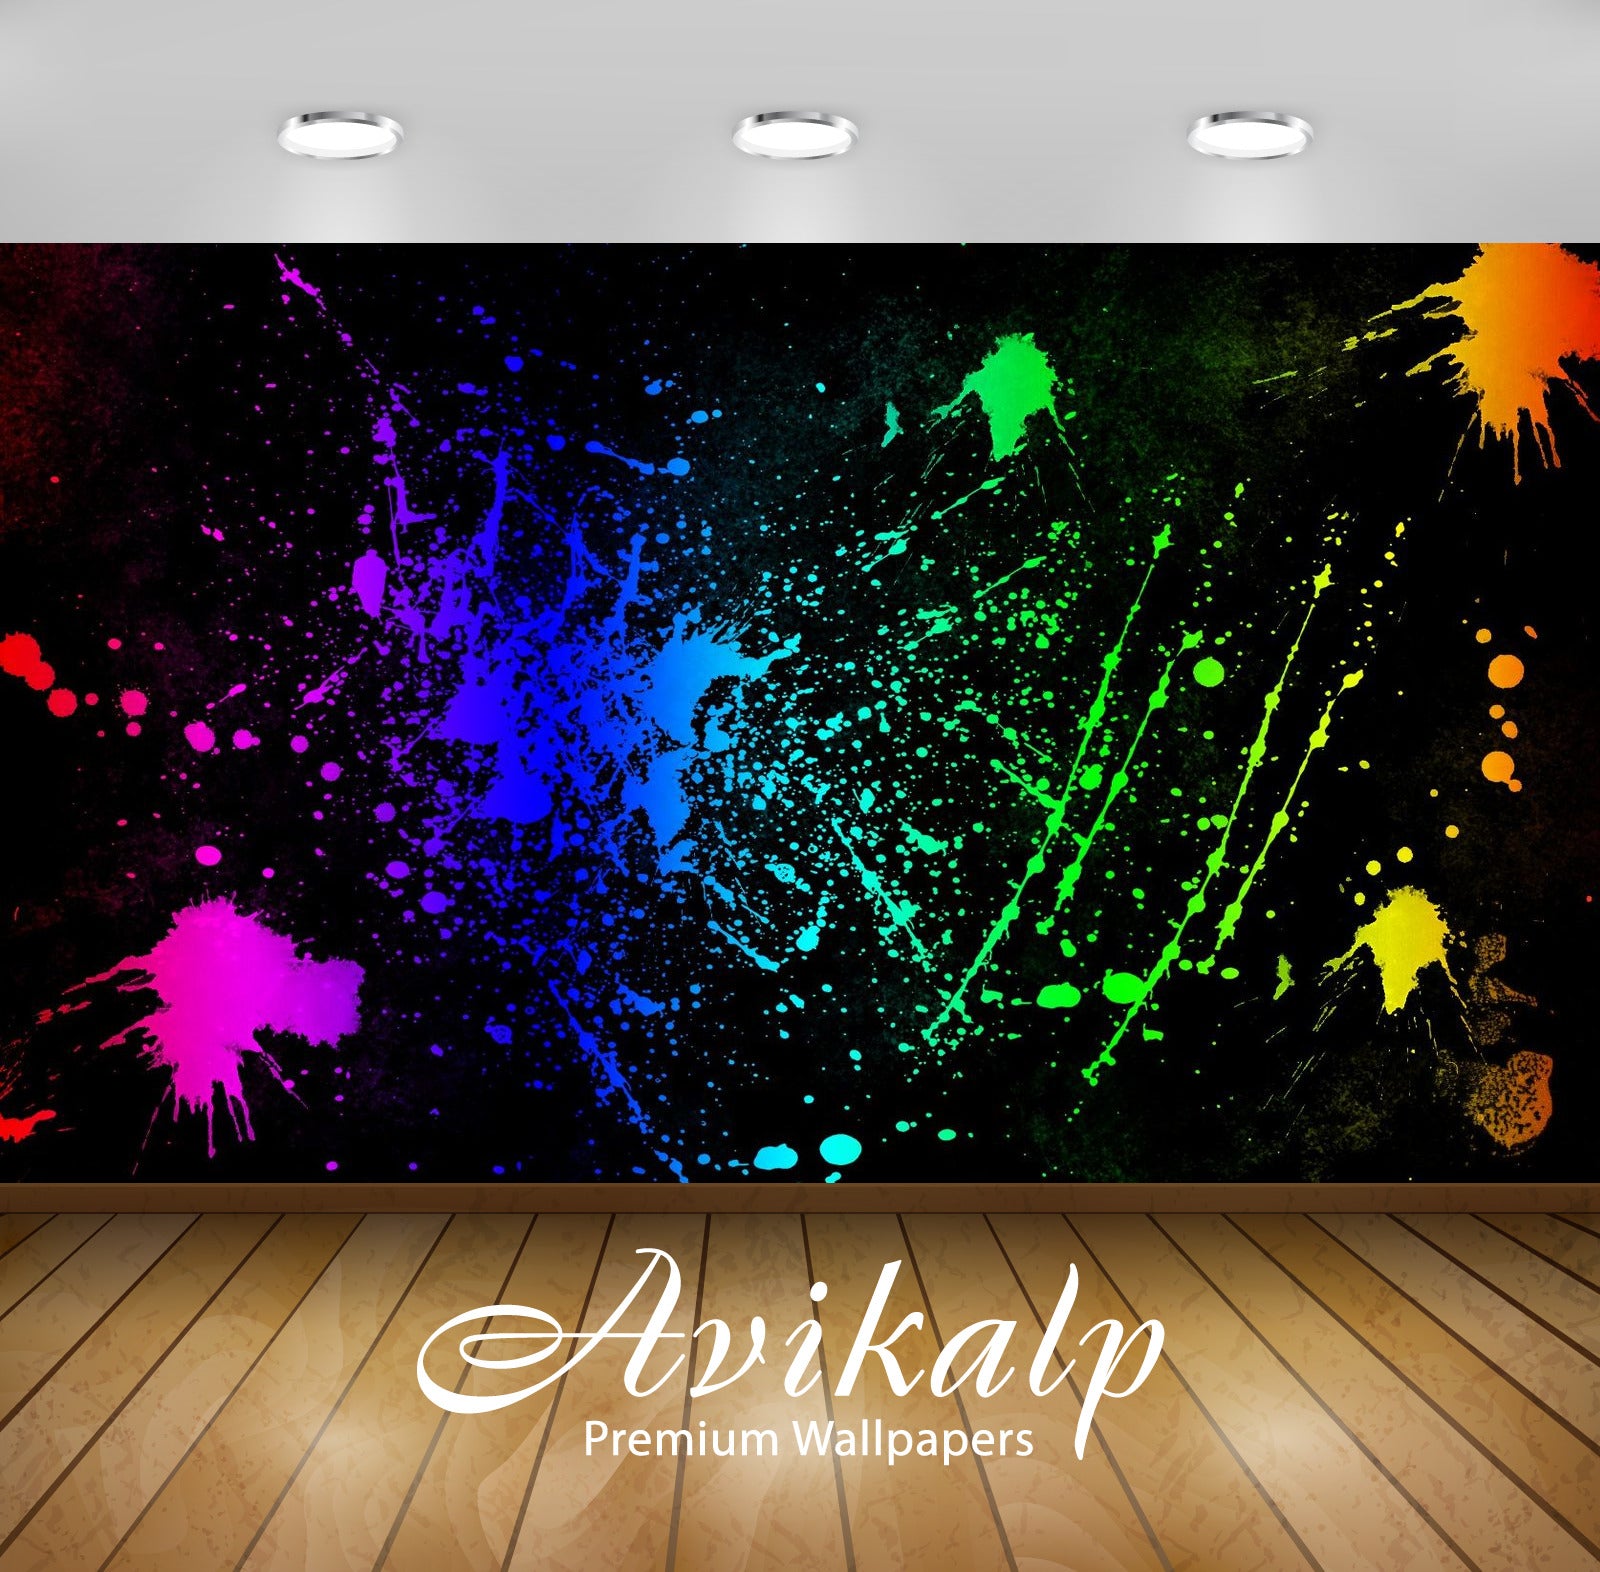 Avikalp Exclusive Awi1332 Color Splash Full HD Wallpapers for Living room, Hall, Kids Room, Kitchen,